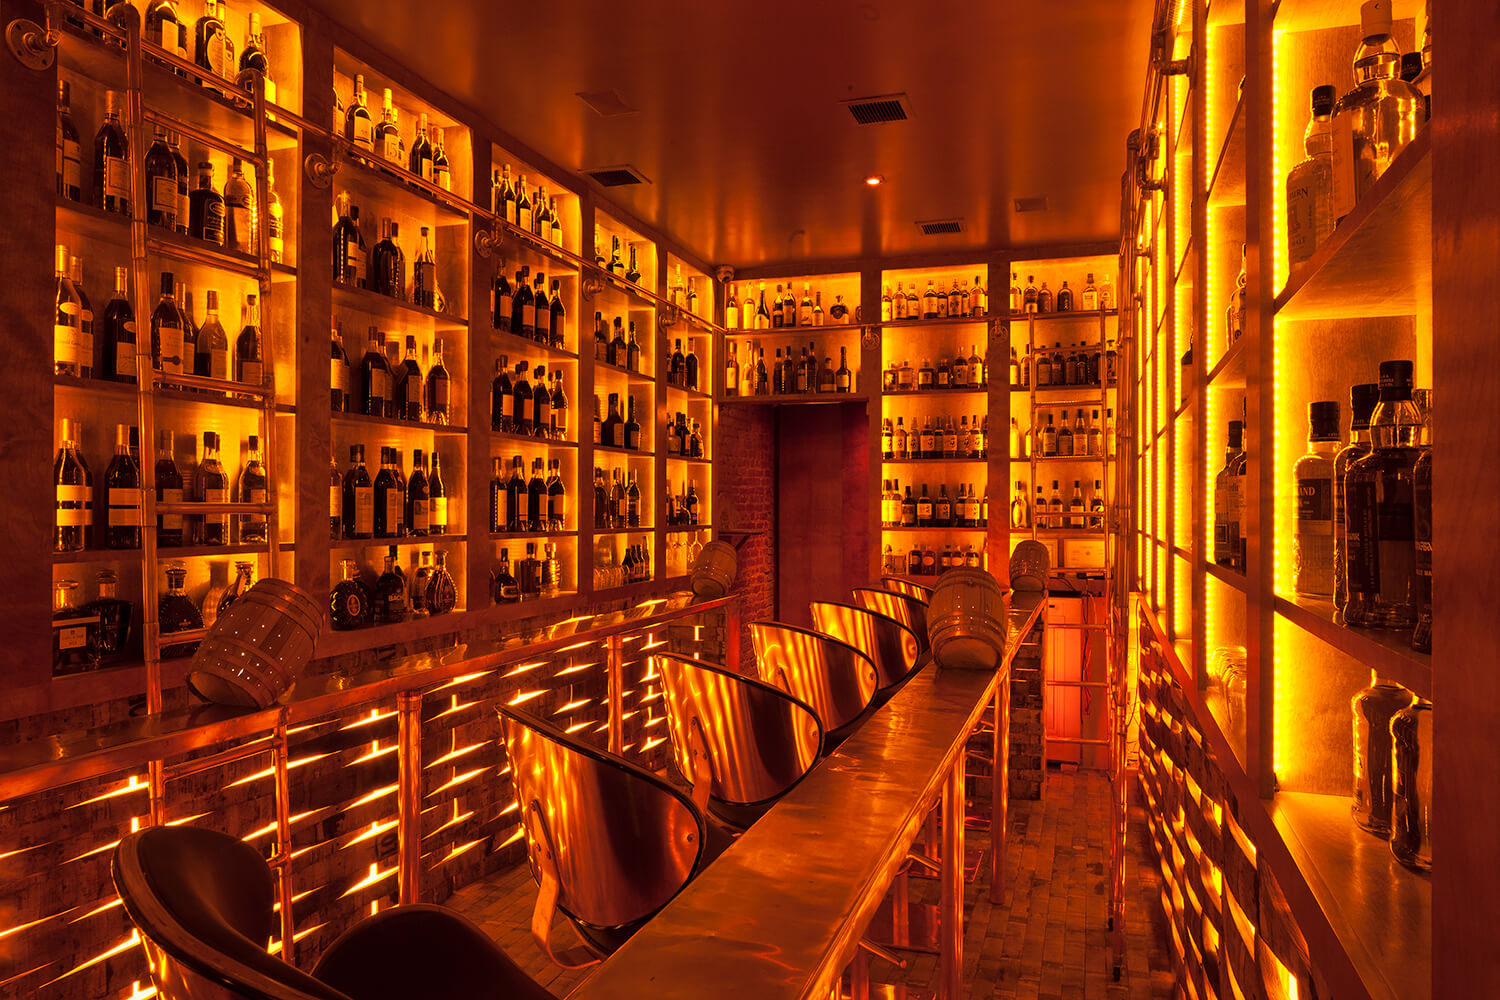 Copper & Oak NYC located on the Lower East Side of Manhattan - Bars that have bar snacks on the menu